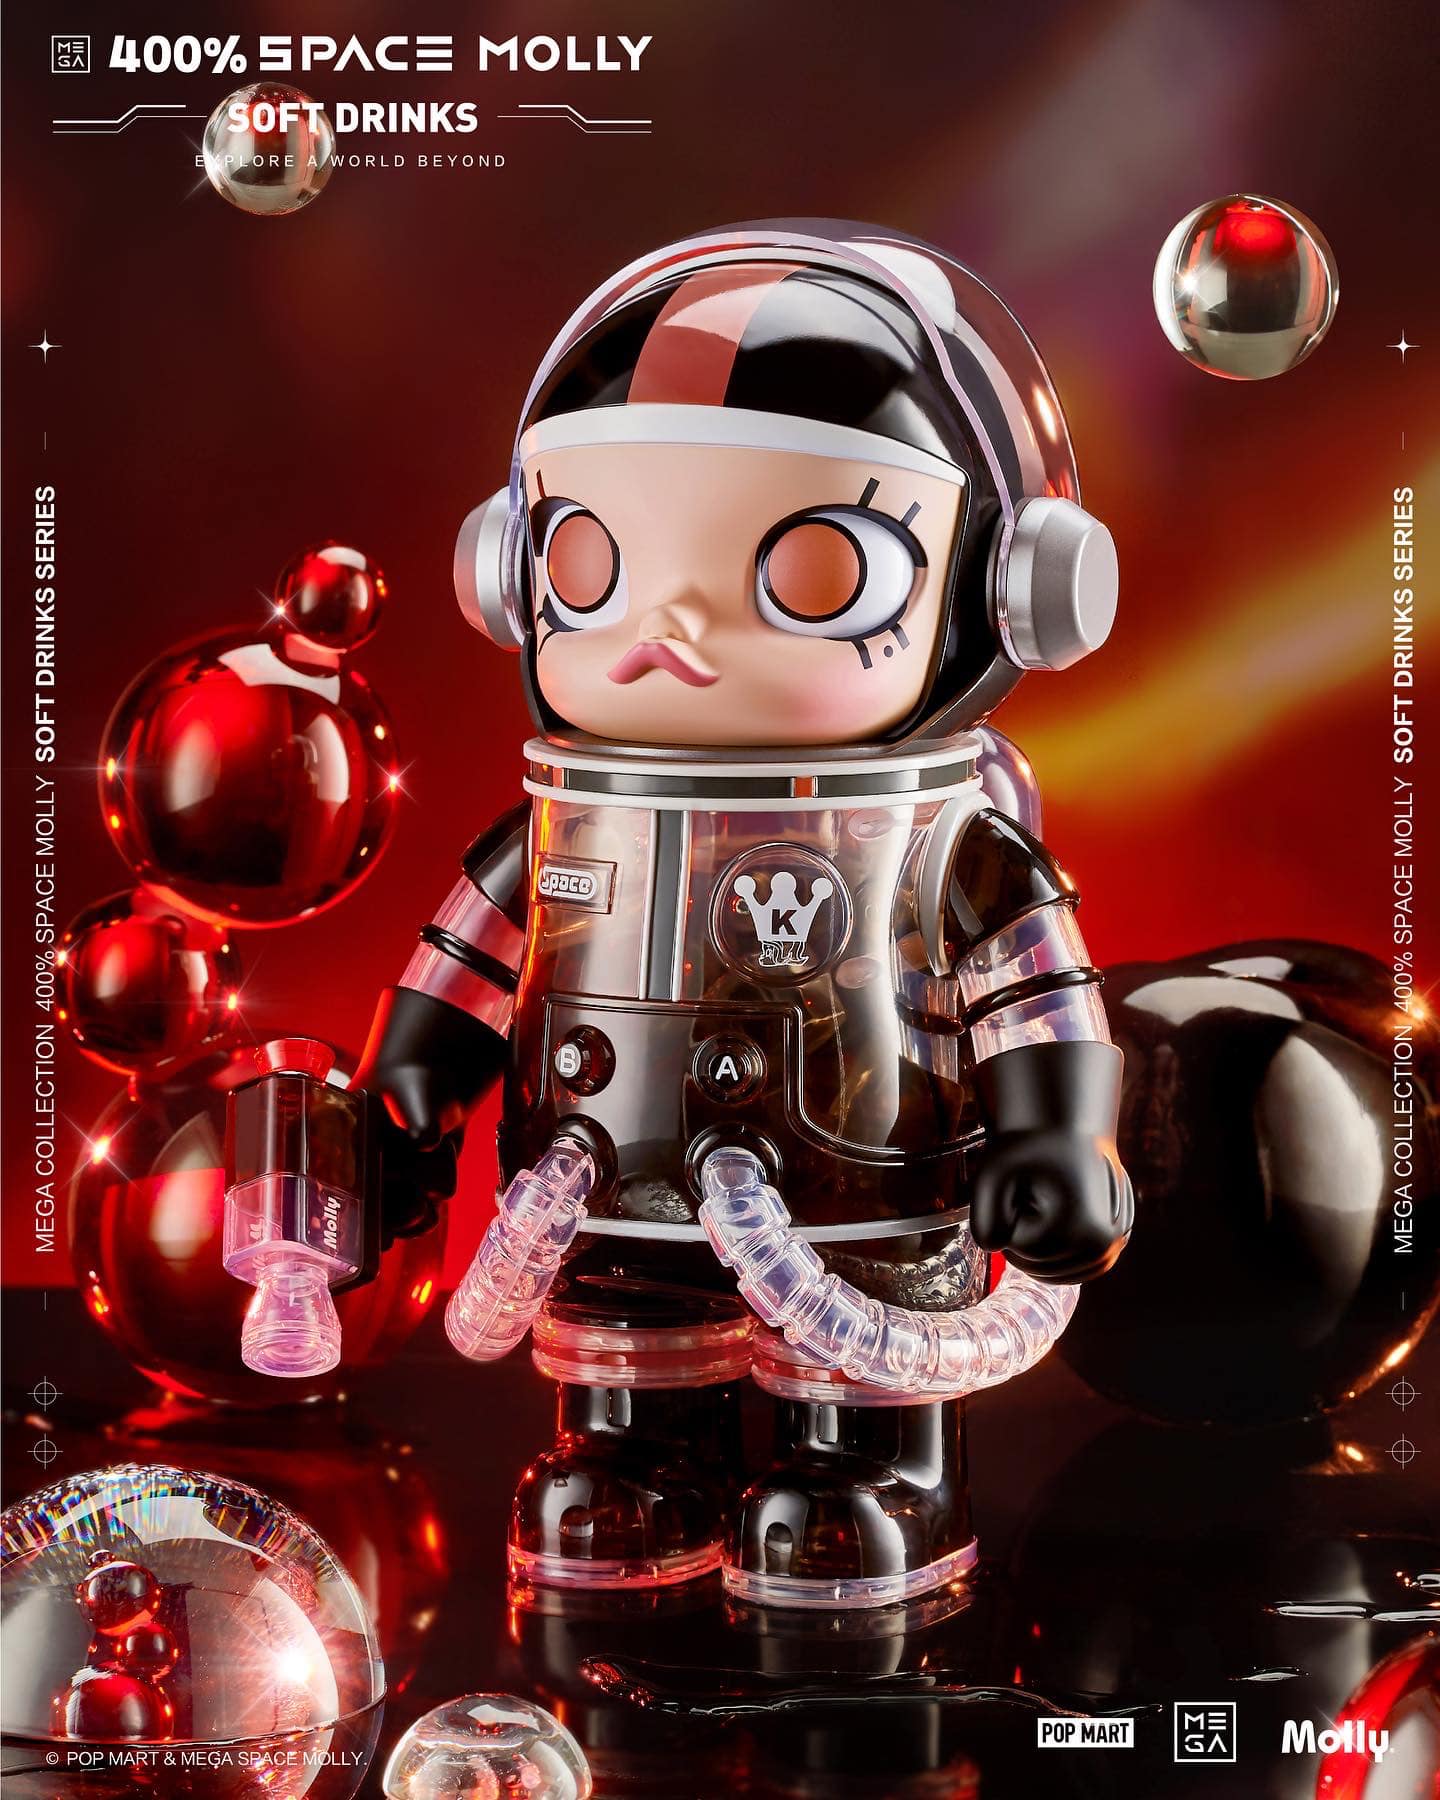 POP MART x Kenny Wong 400%Space Molly Soft Drinks Edition - The